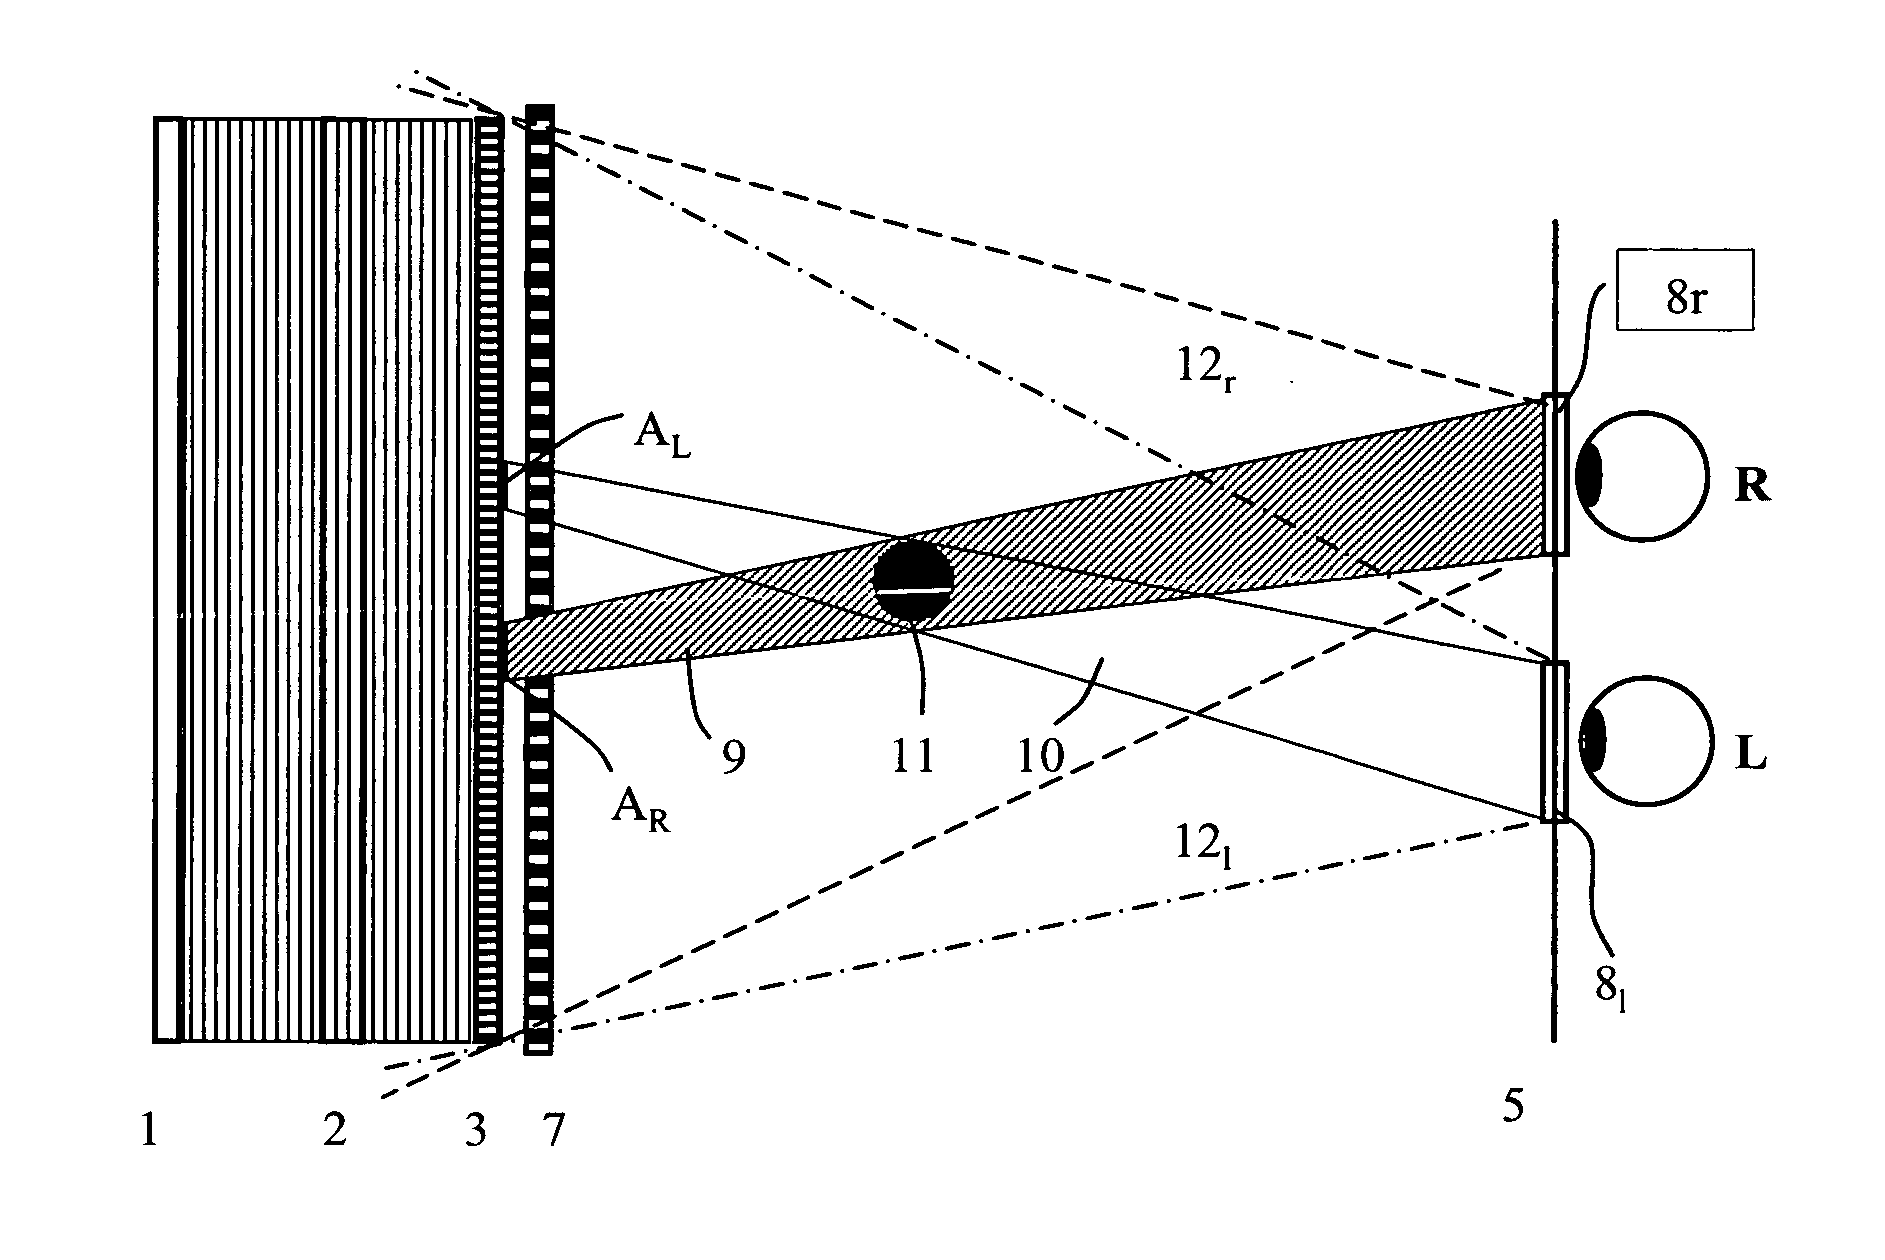 Method for encoding video holograms for holographically reconstructing a scene